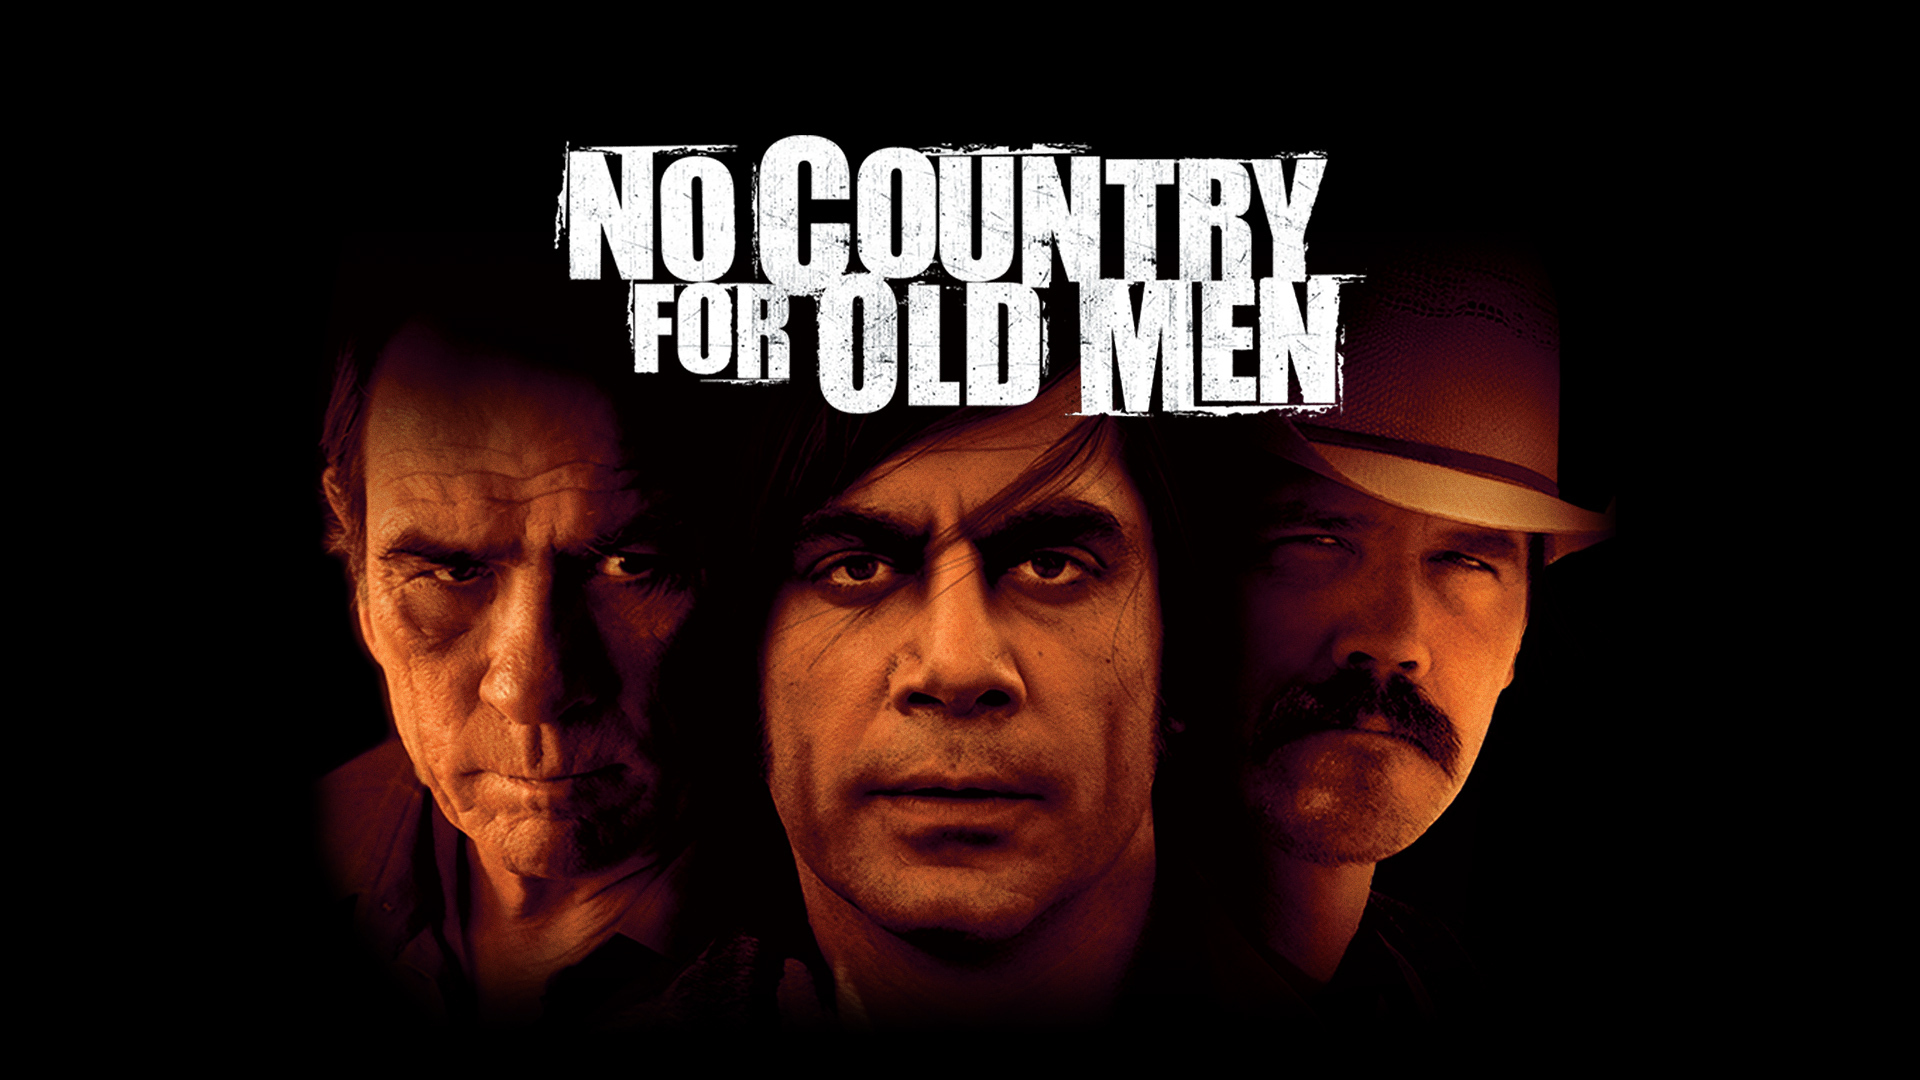 No Country for Old Men - Watch Full Movie on Paramount Plus